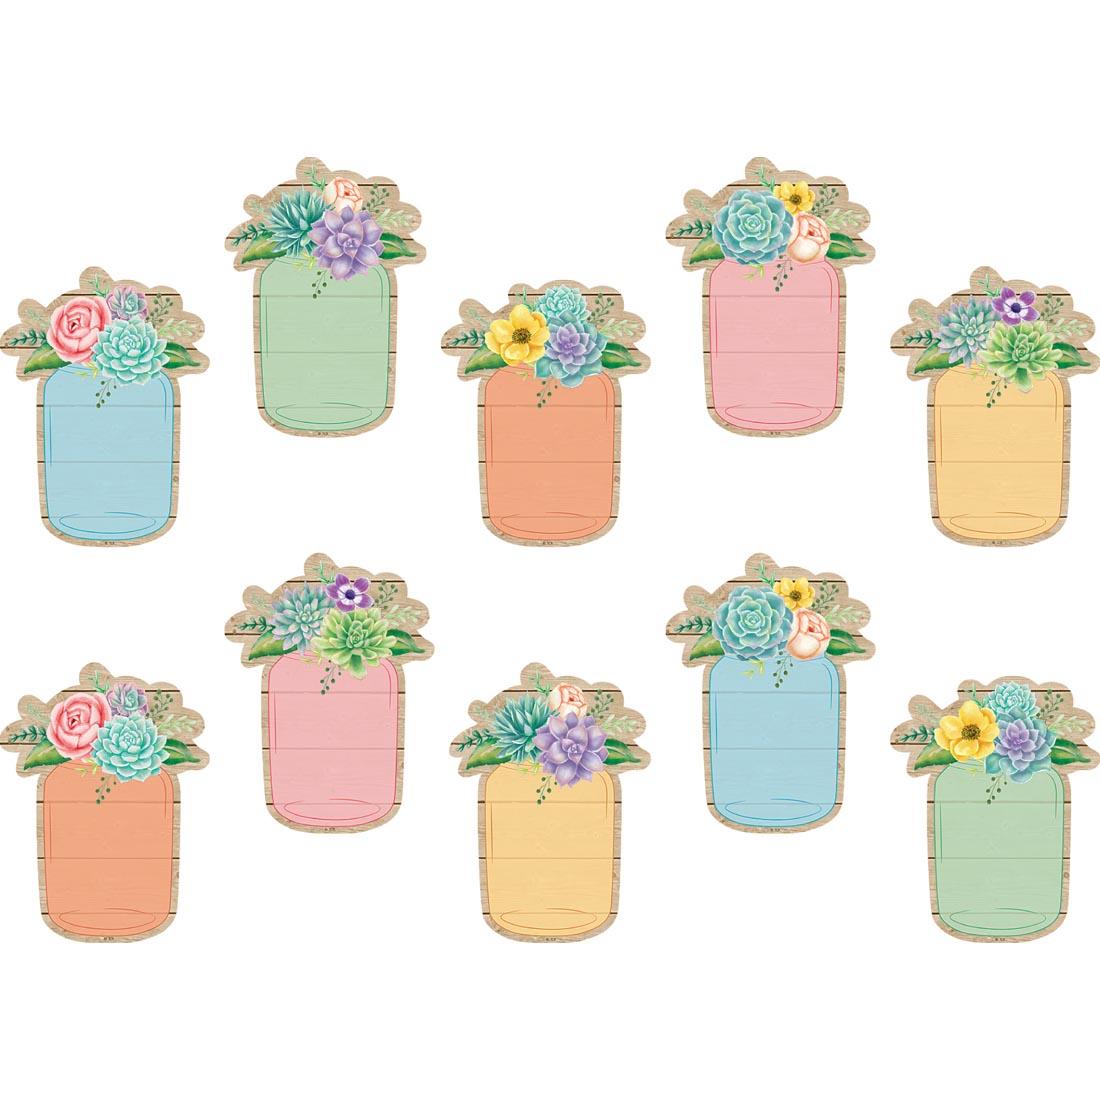 Mason Jars Accents from the Rustic Bloom collection by Teacher Created Resources